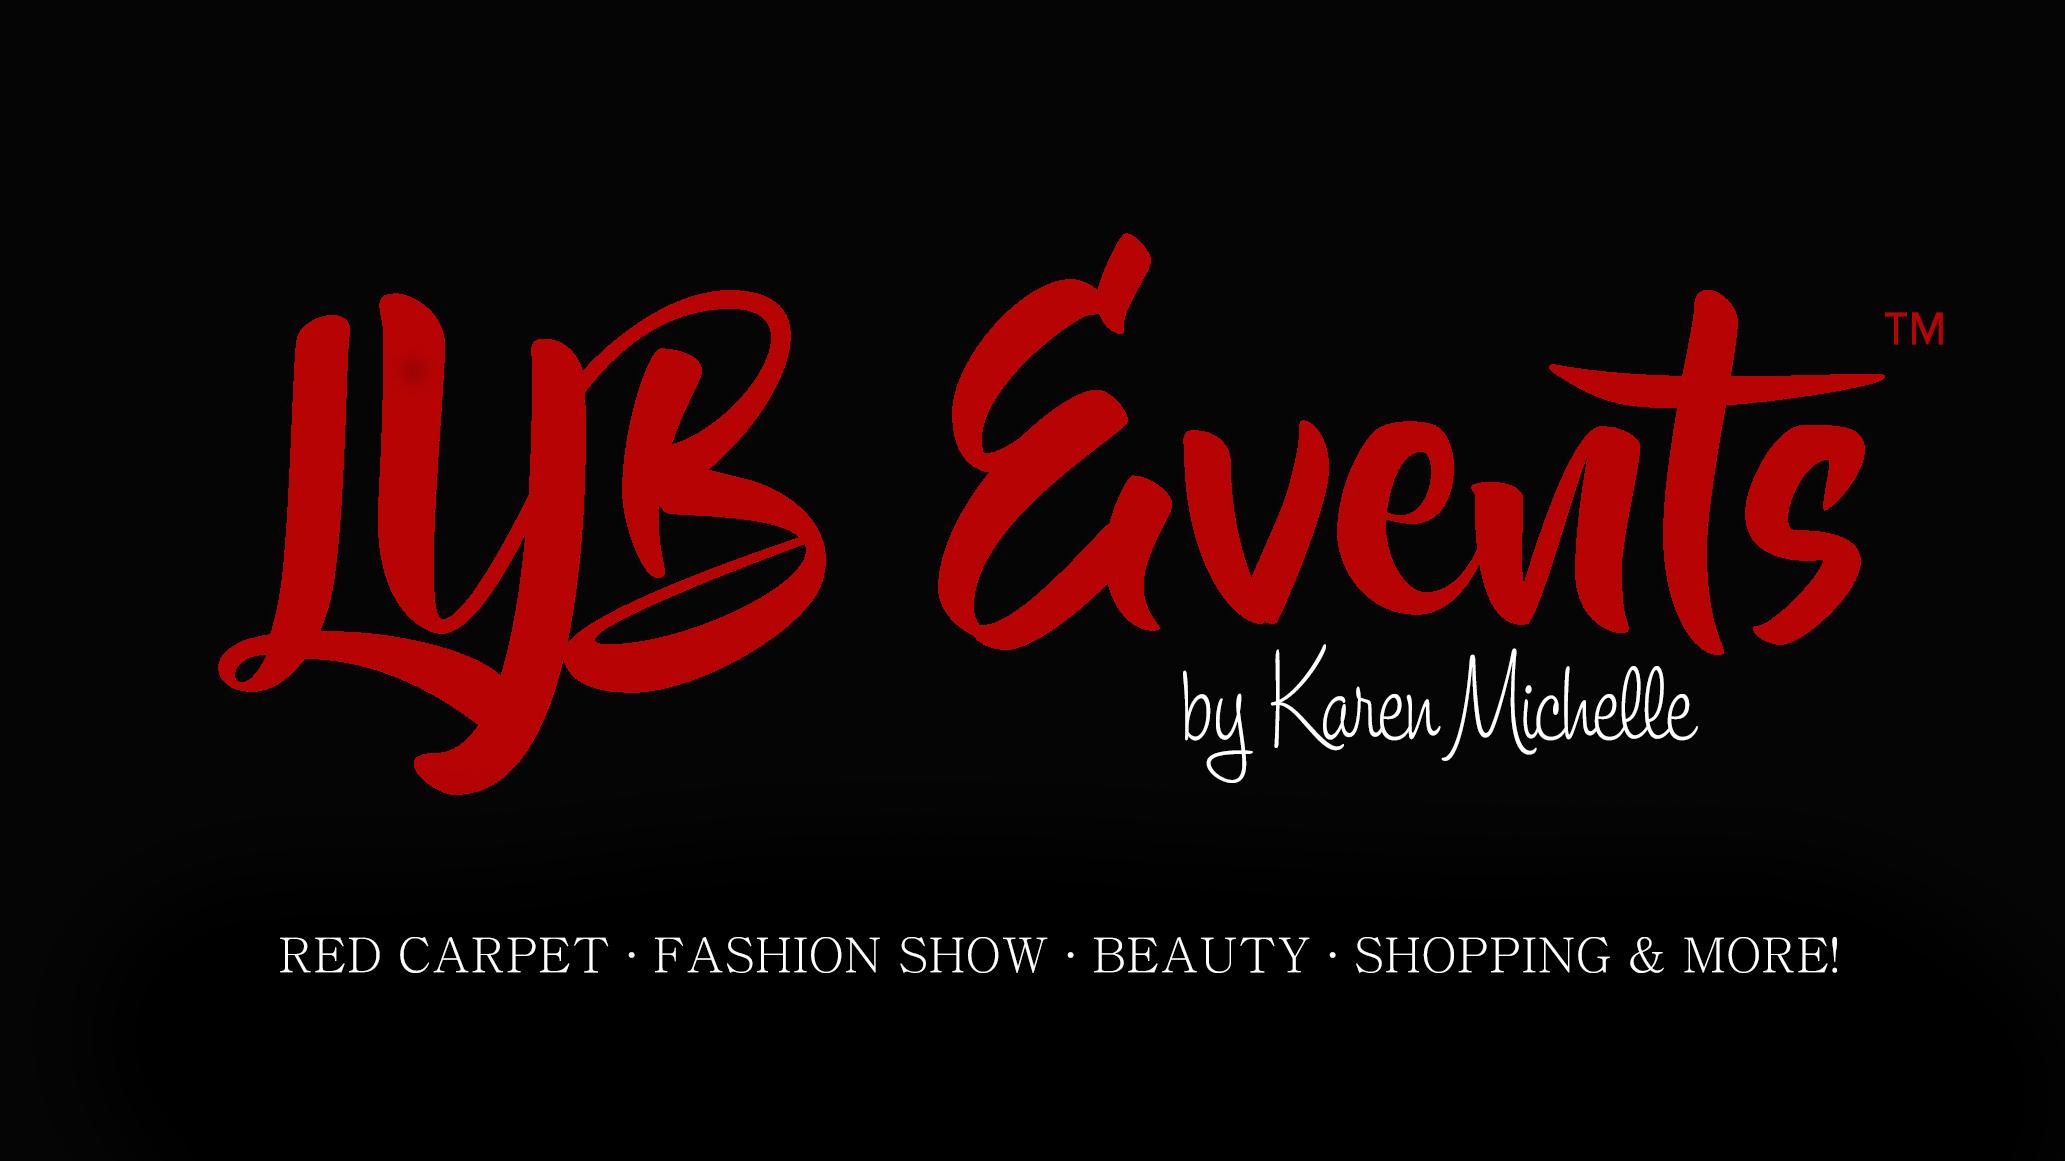 LYB Events by Karen Michelle - Spring 2020 - Red Carpet, Fashion Show, Beauty, Shopping & More!